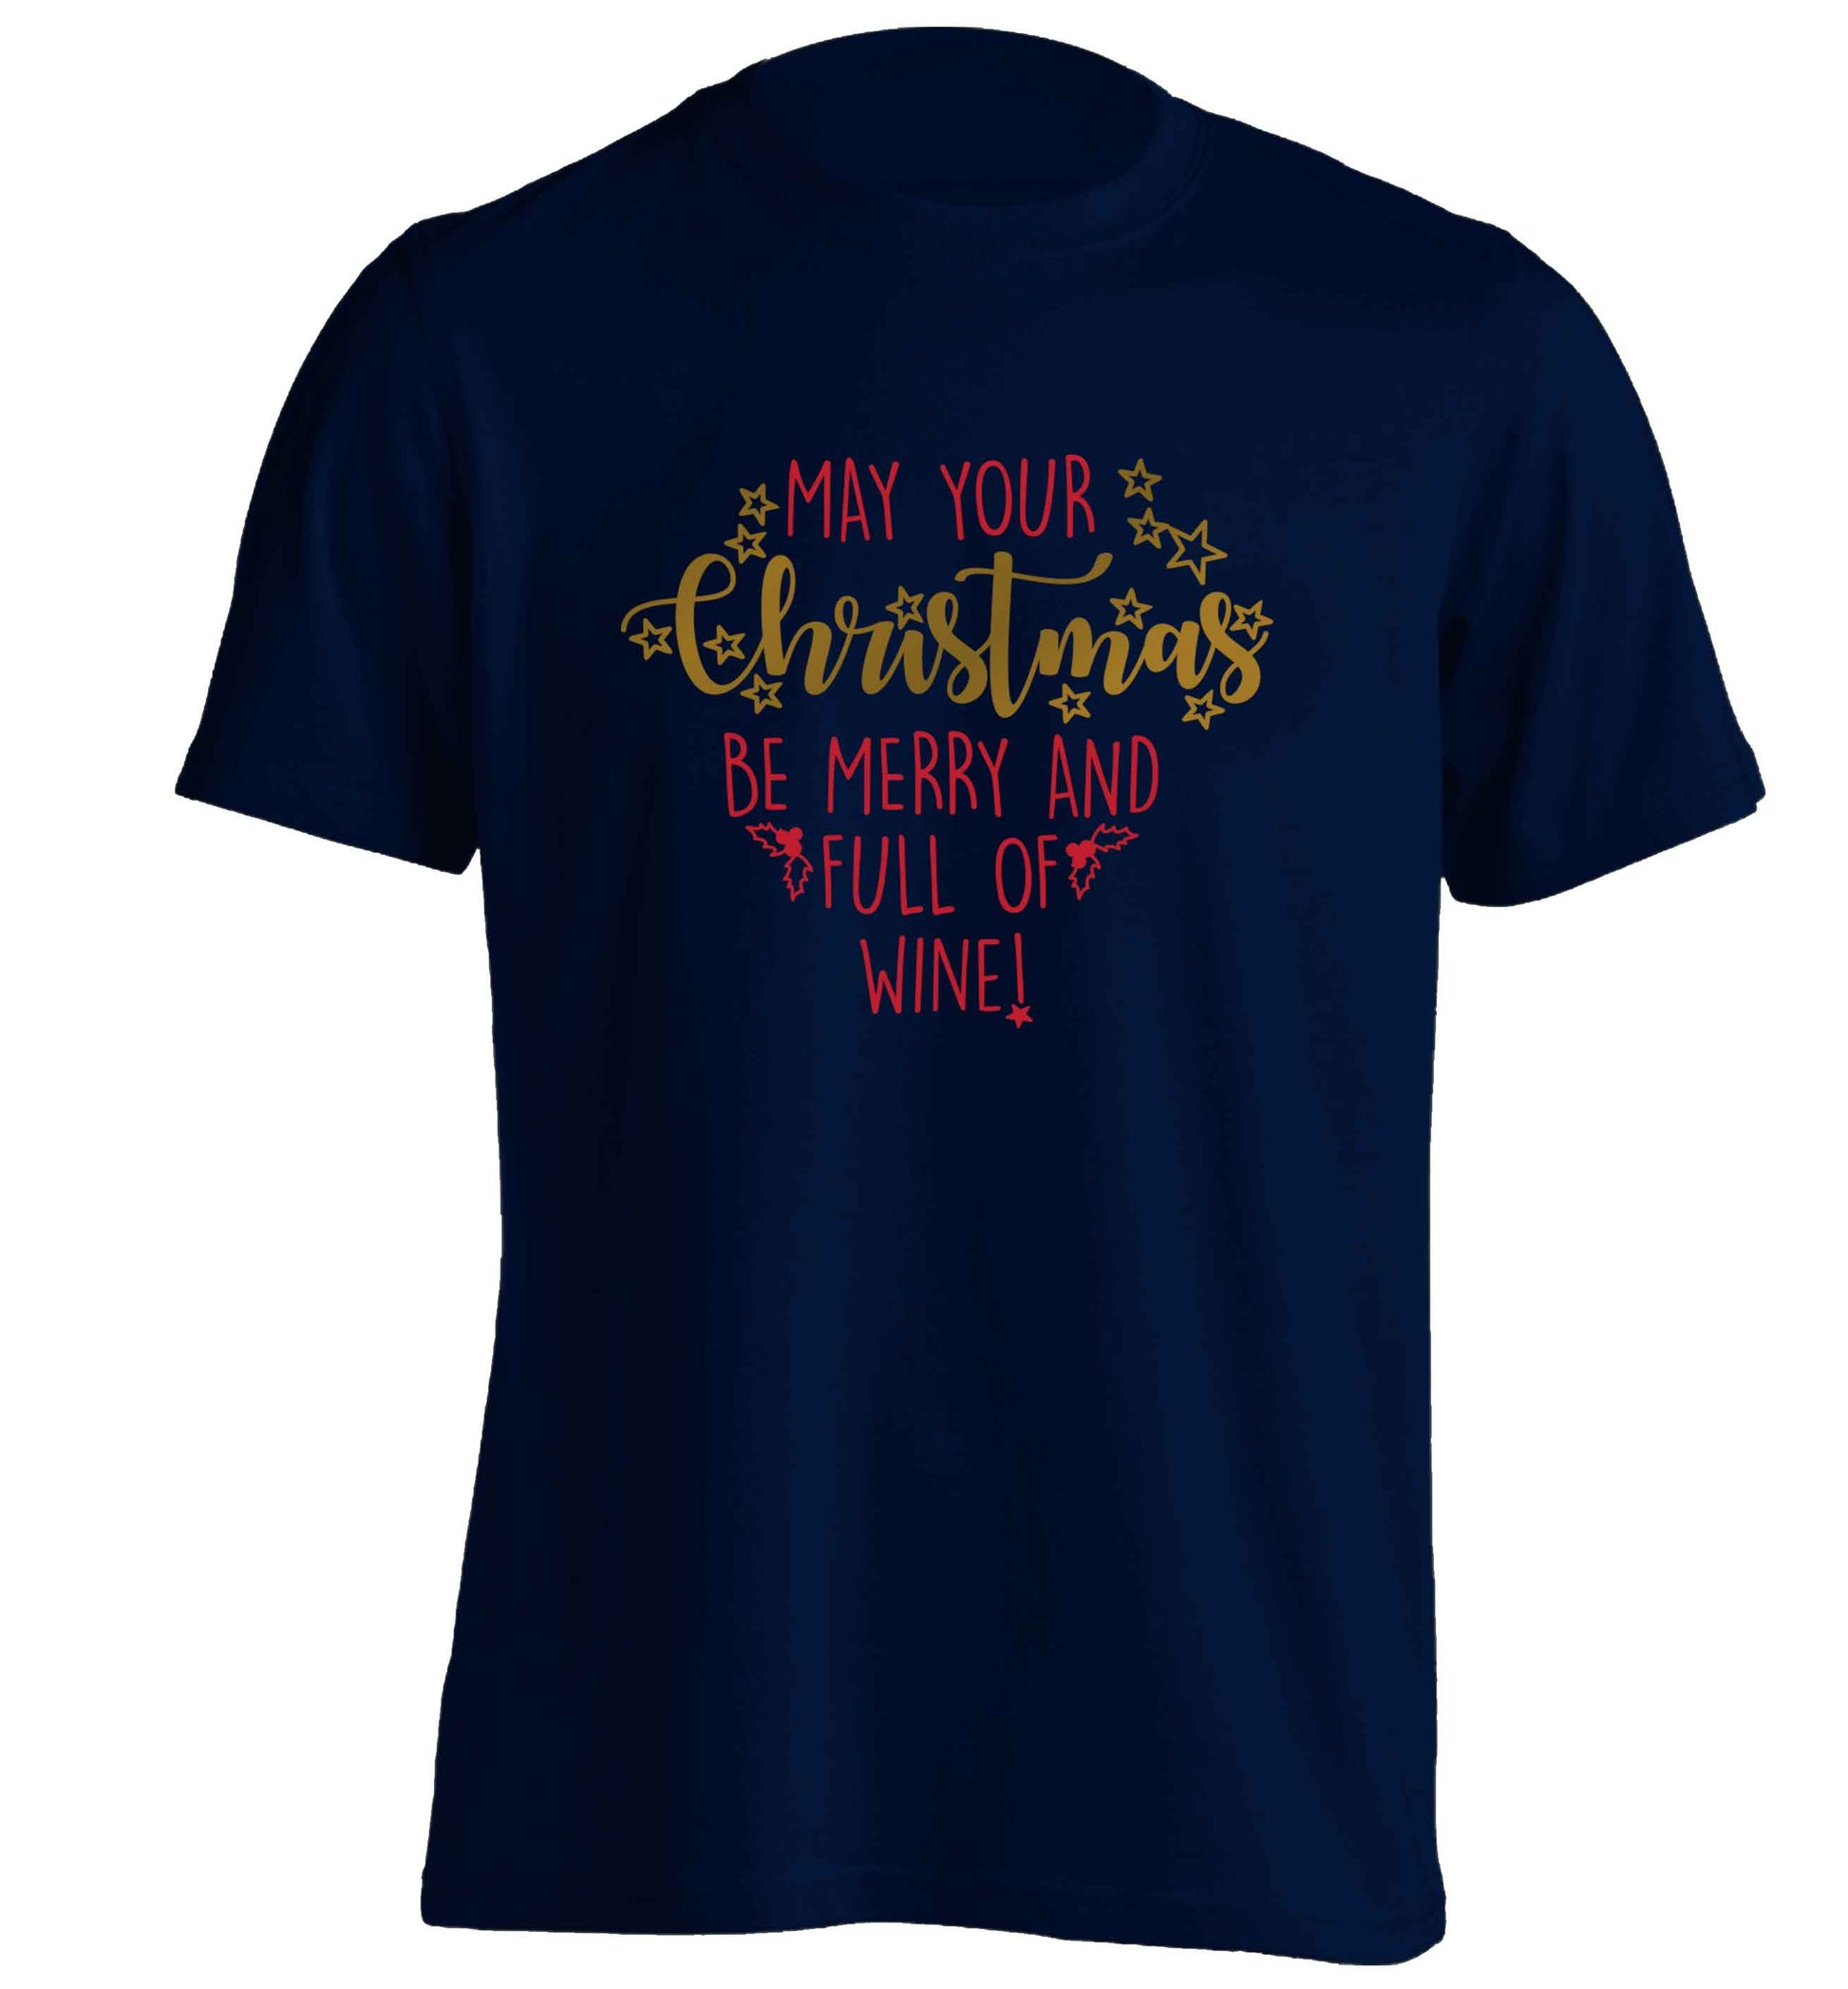 May your Christmas be merry and full of wine adults unisex navy Tshirt 2XL